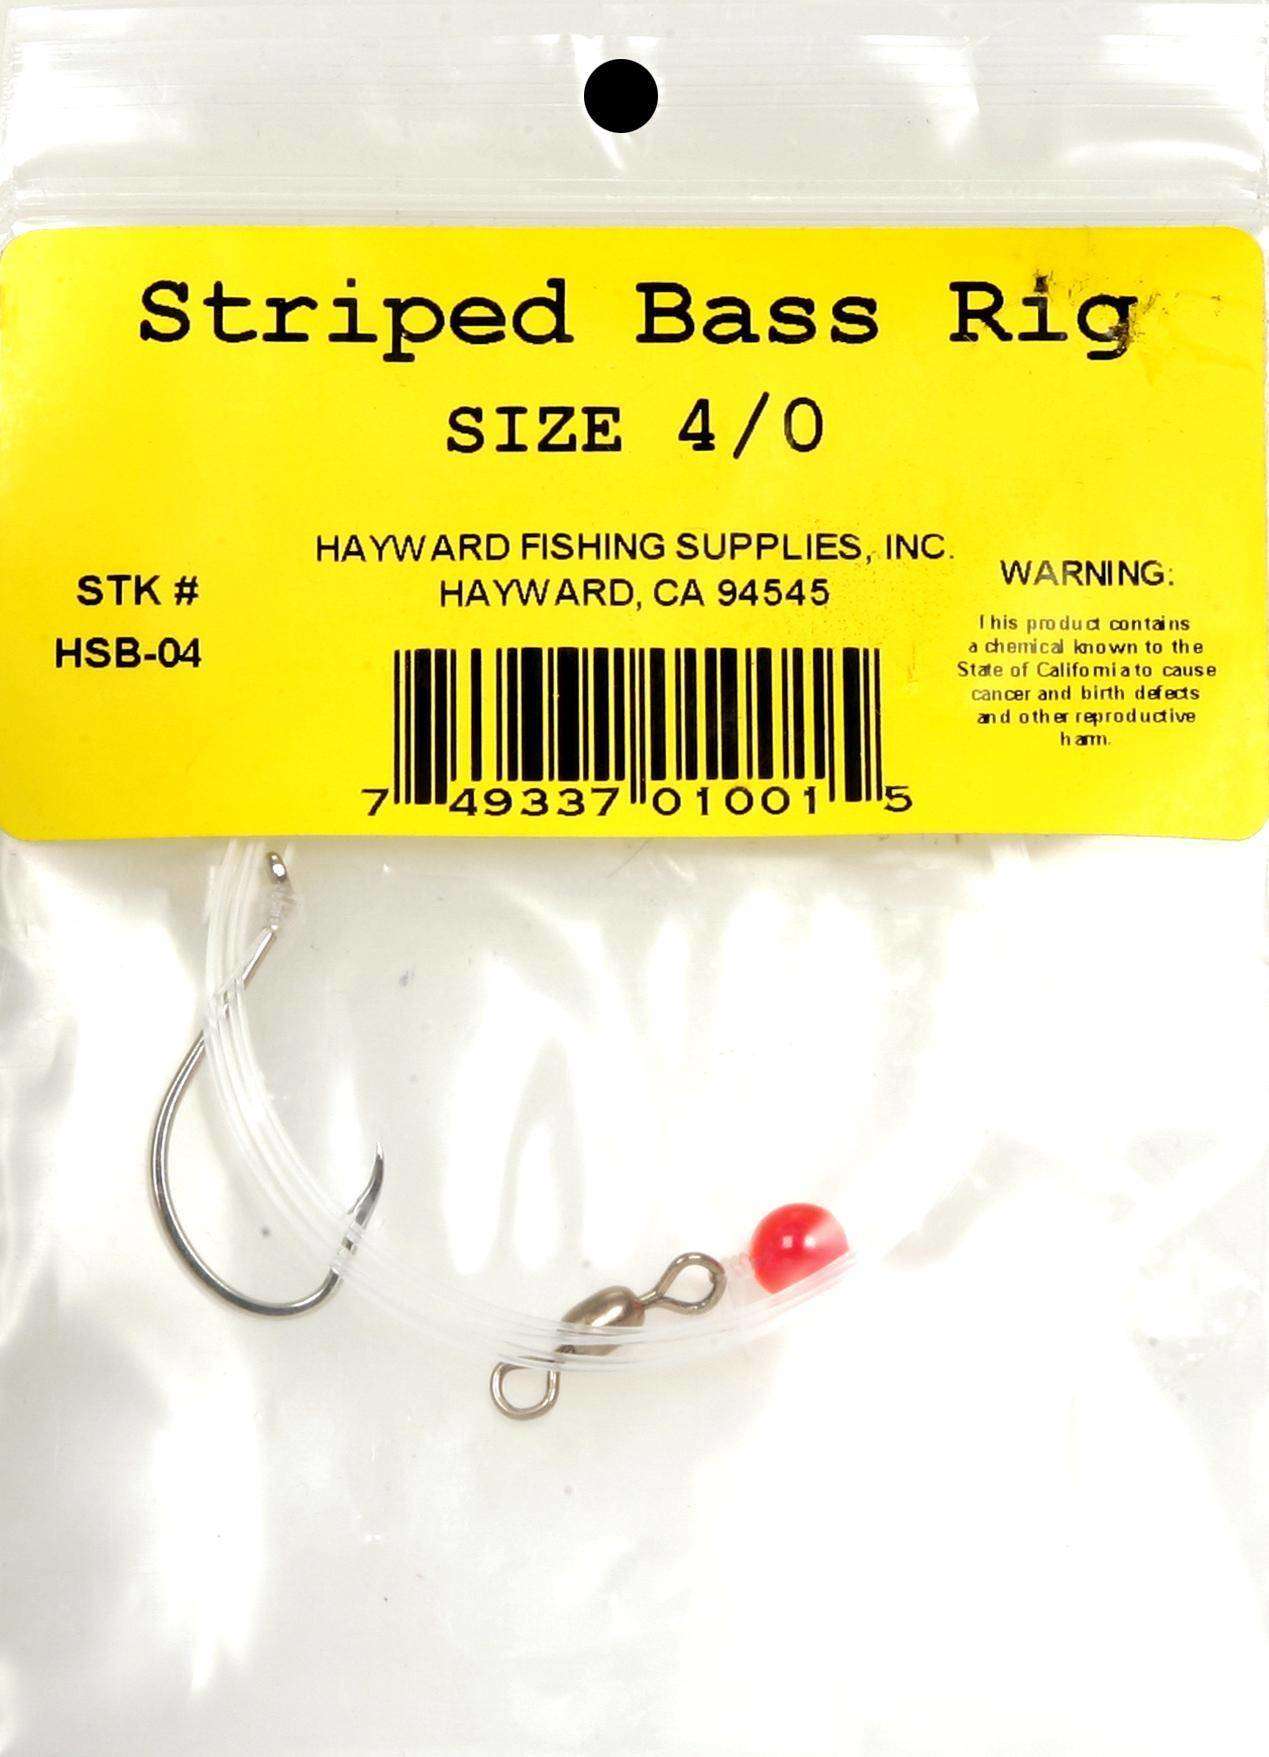 Hayward Fishing Supplies Striped Bass Rig 1 Per Pack Size 5/0 - High  Quality